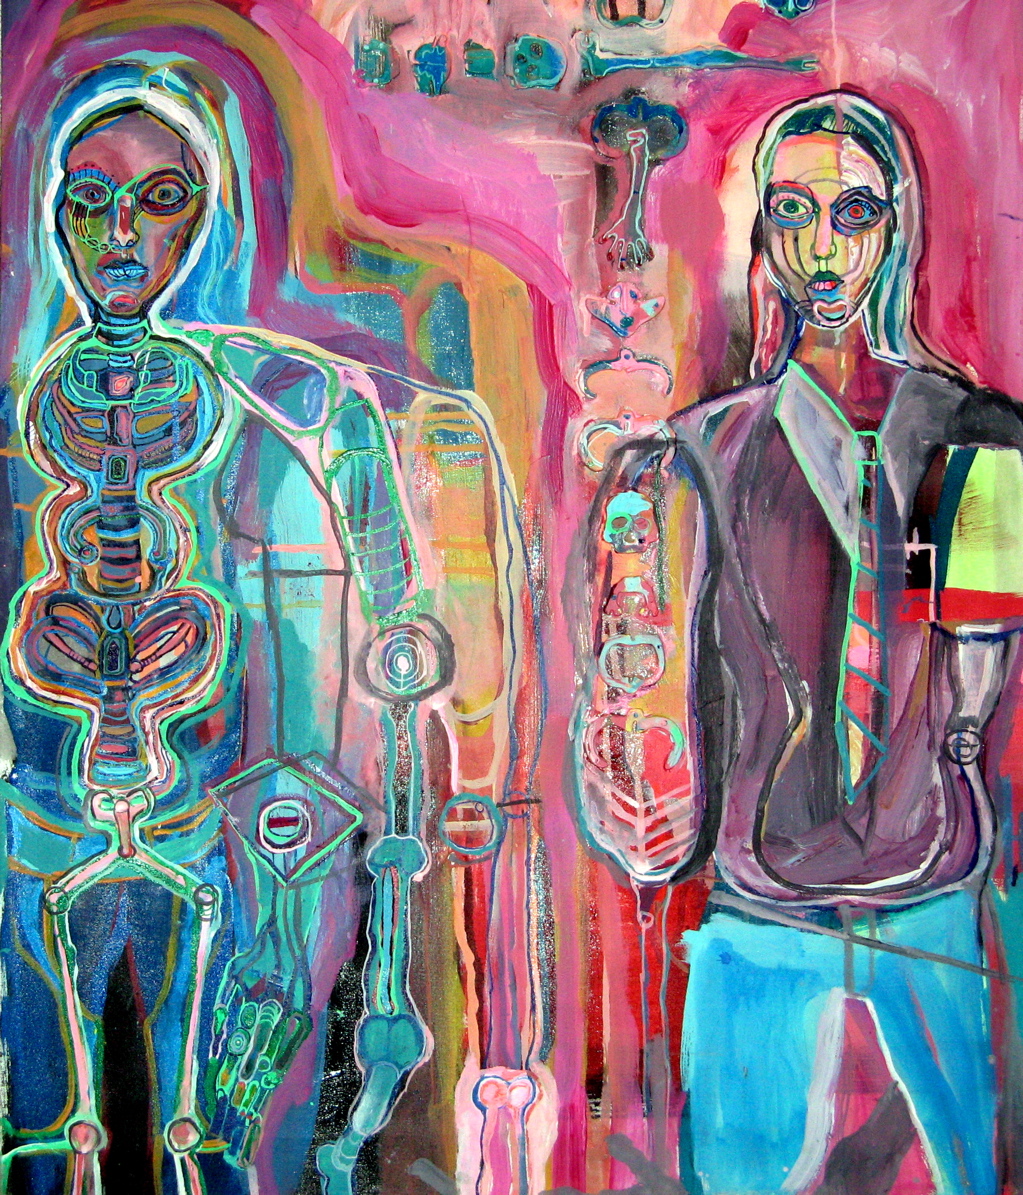 model man, mixed media on canvas, 36x22", 2004 (sold)